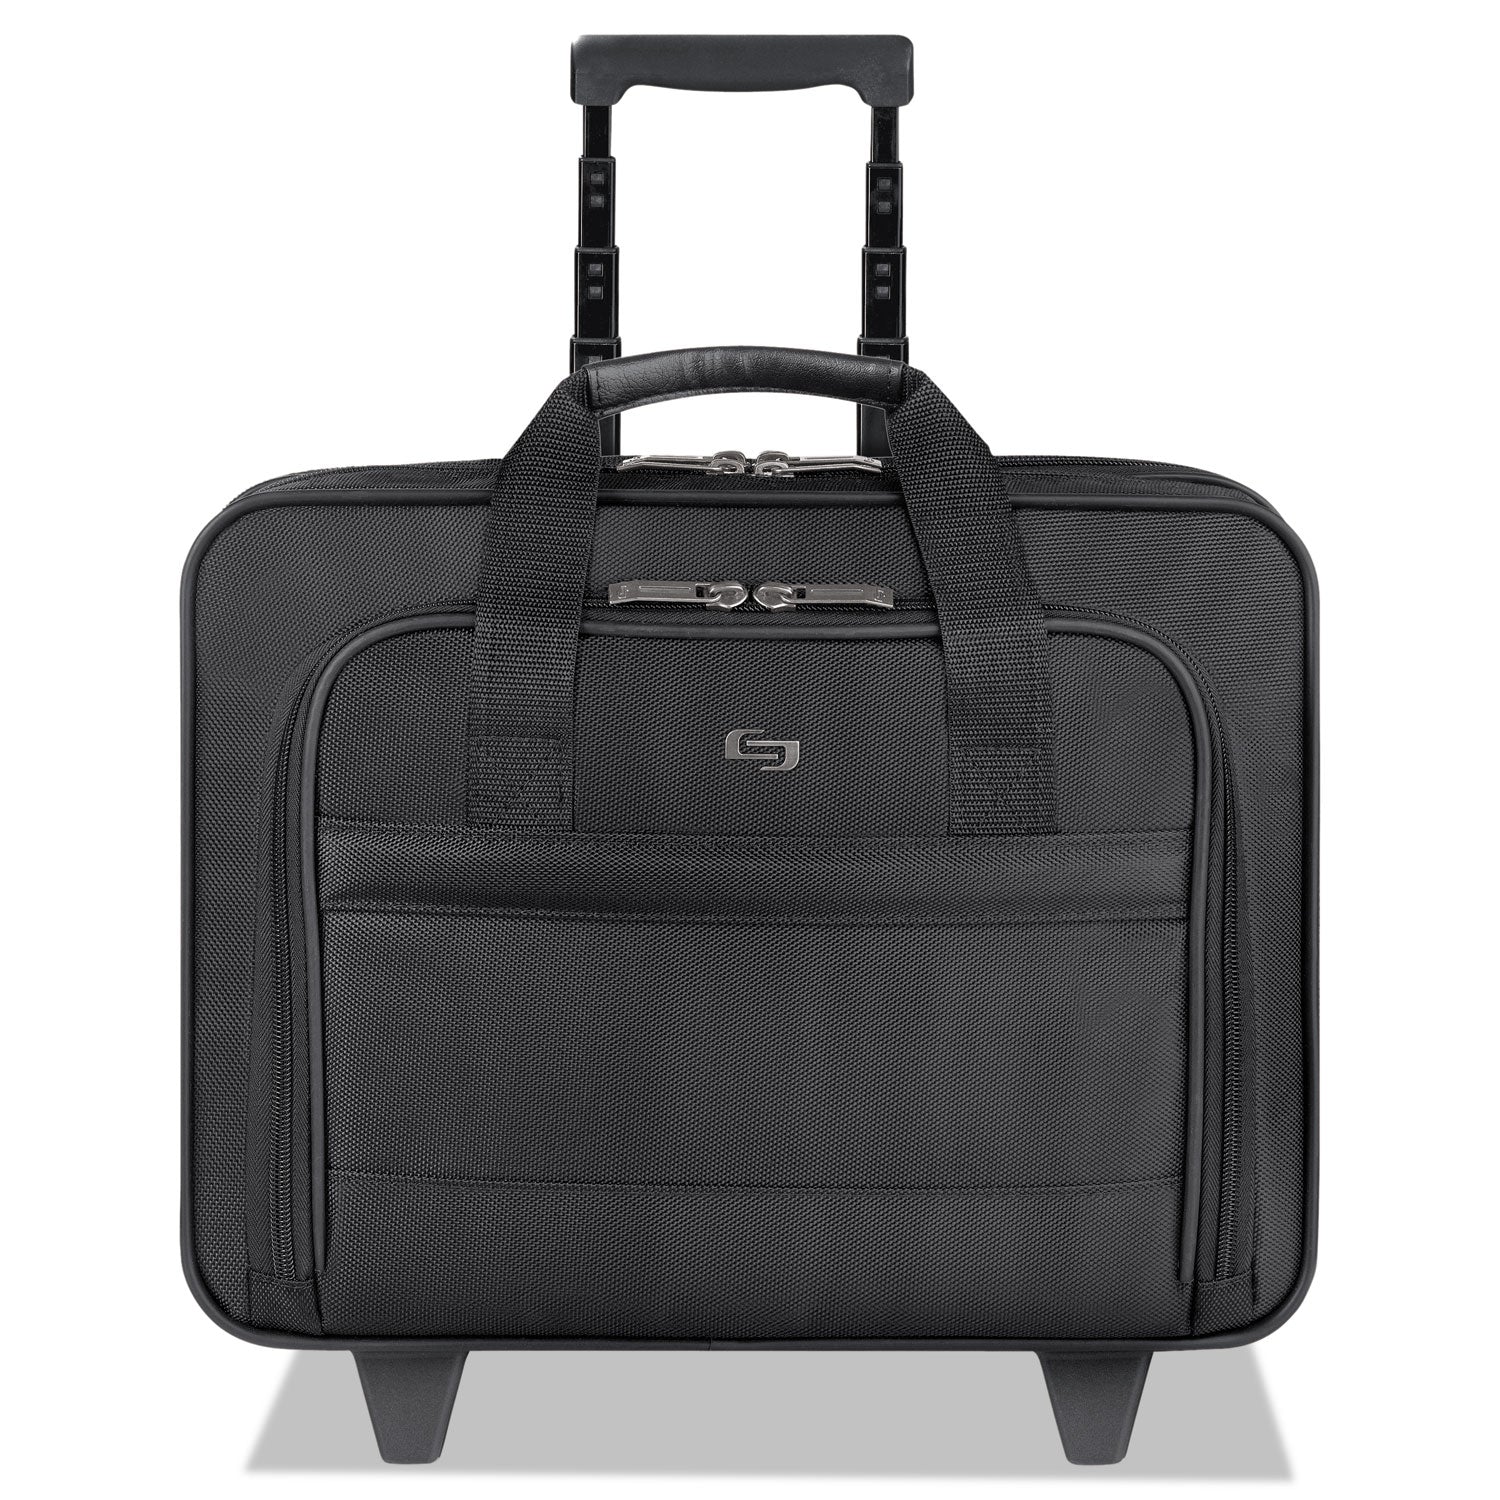 Classic Rolling Case, Fits Devices Up to 15.6", Ballistic Polyester, 15.94 x 5.9 x 12, Black - 